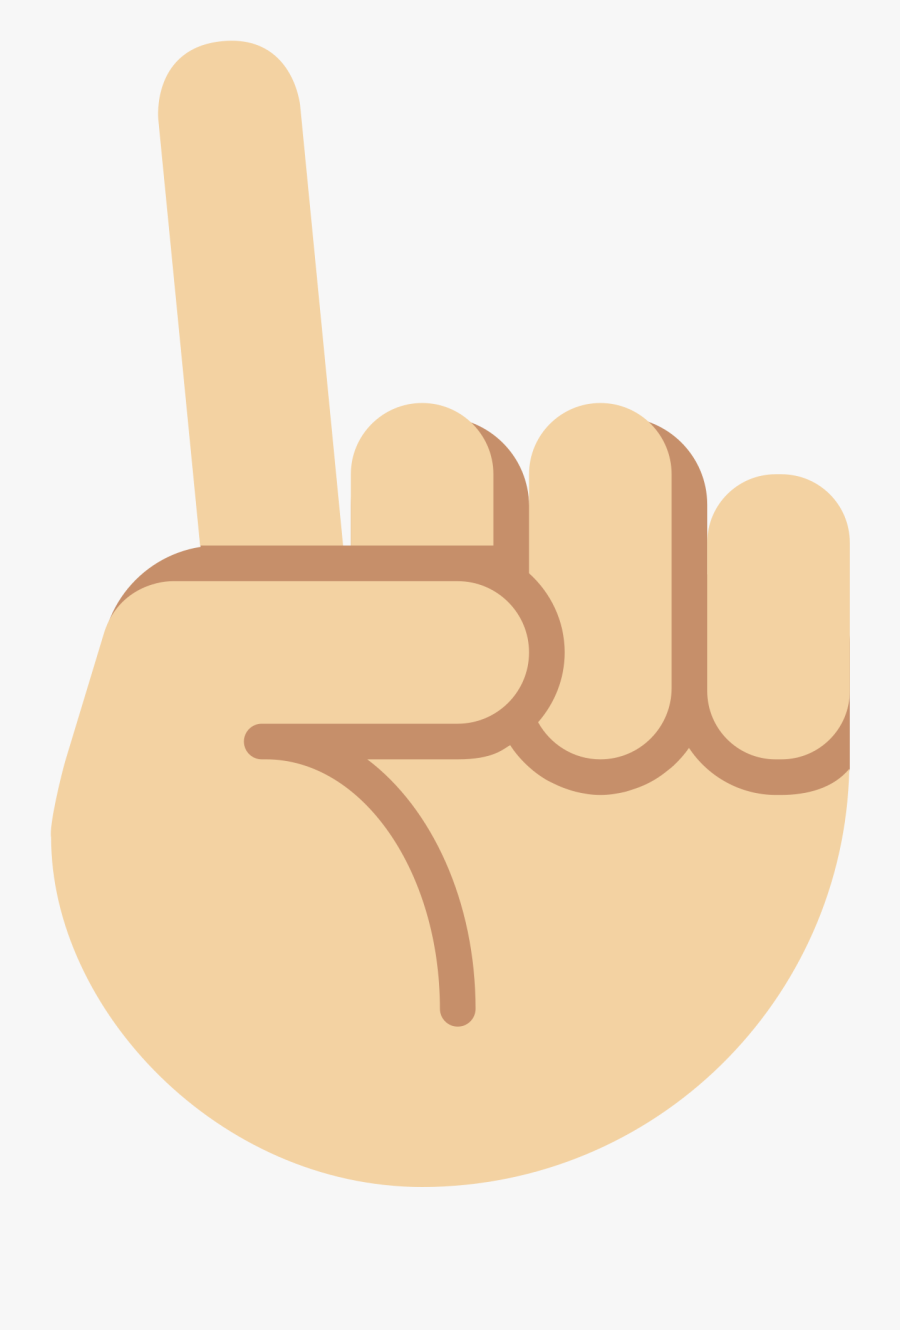 Transparent Hand Pointing Up Clipart, Transparent Clipart